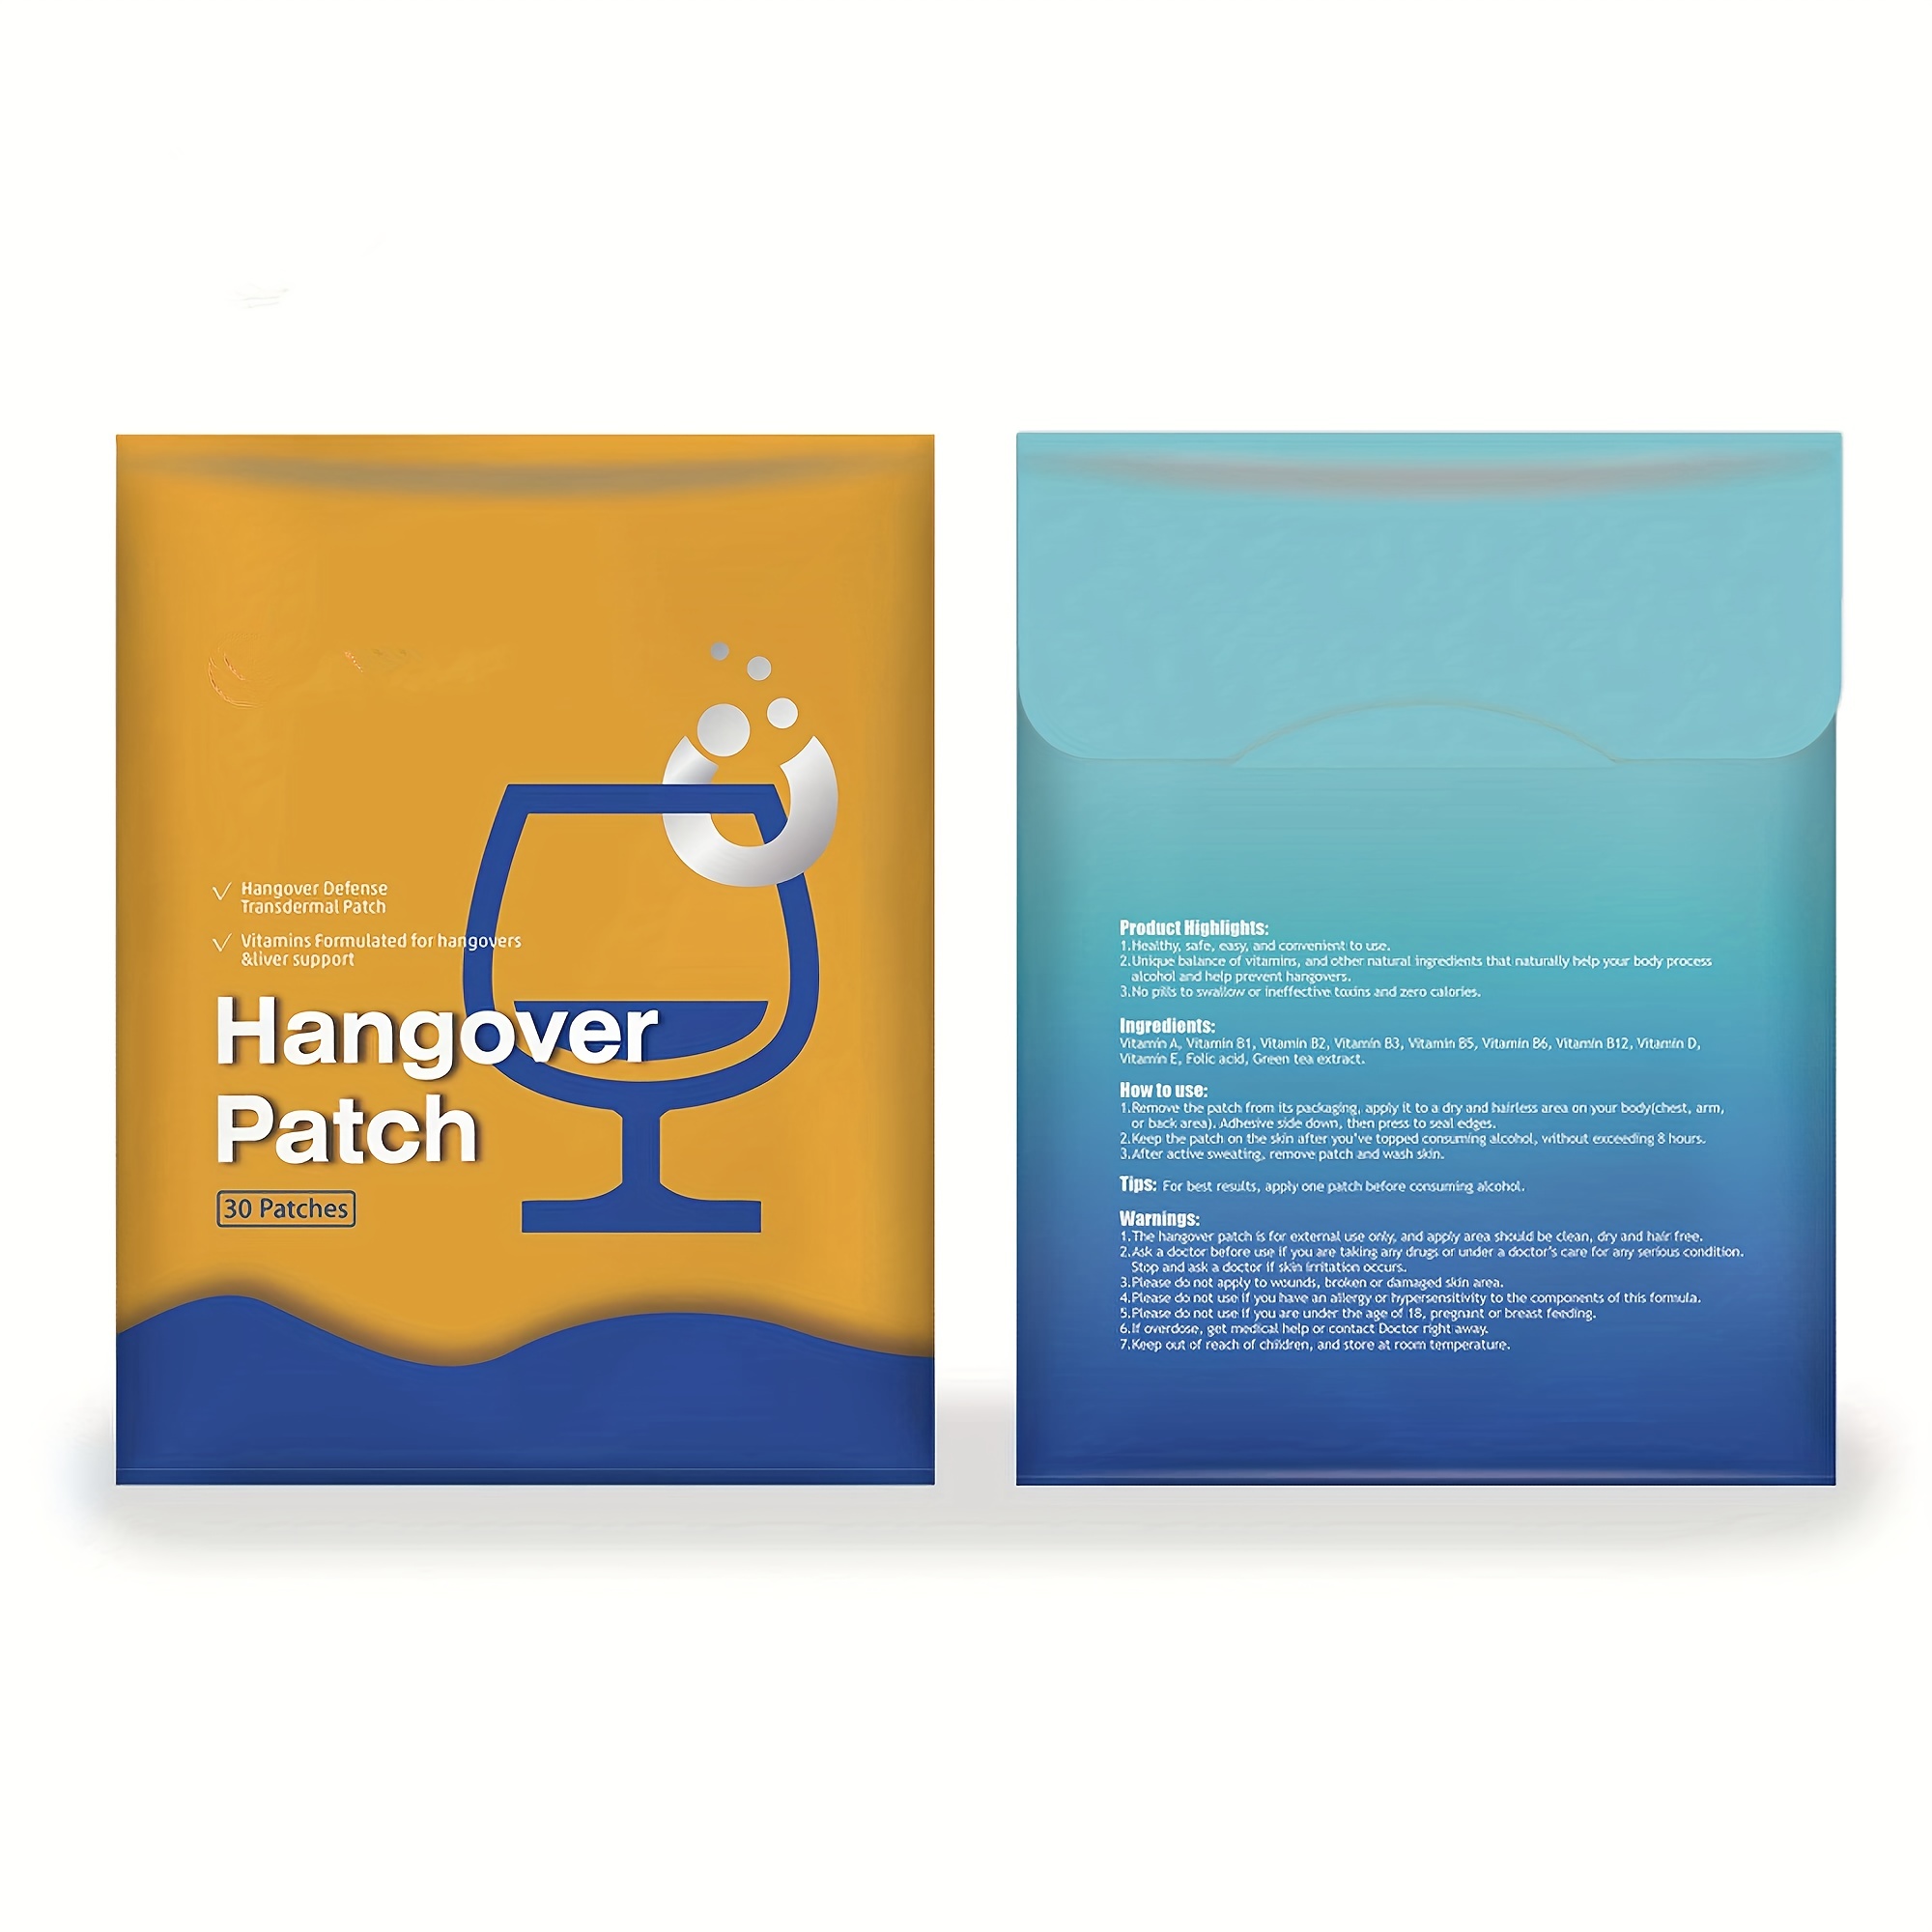 Party Patch Transdermal Vitamin Hangover Defense Patch